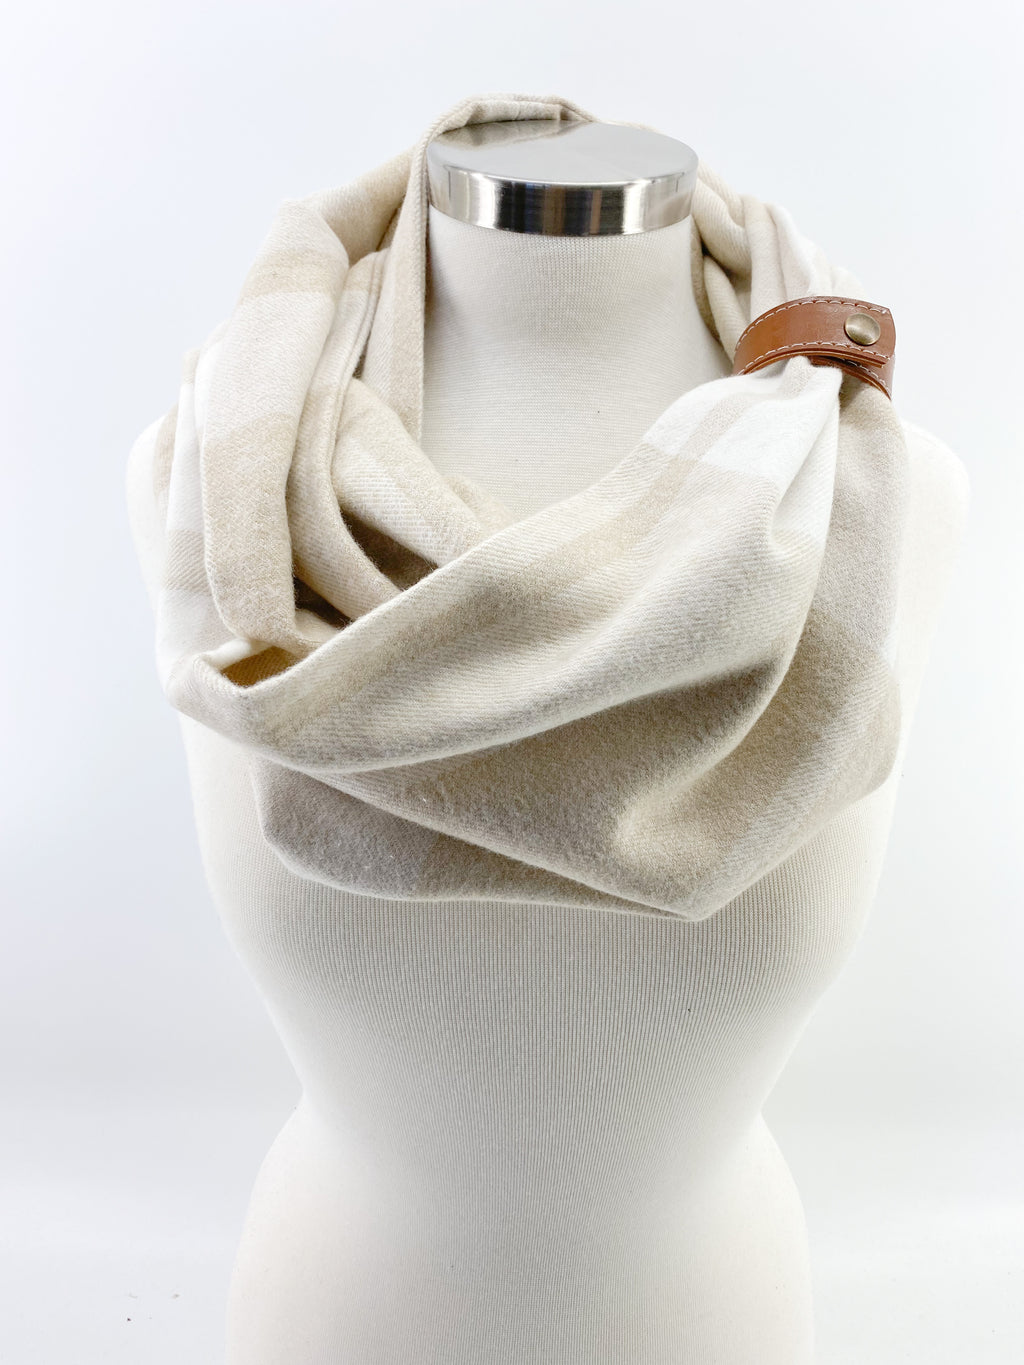 Neutral Beige Plaid Eternity Scarf with a Leather Cuff